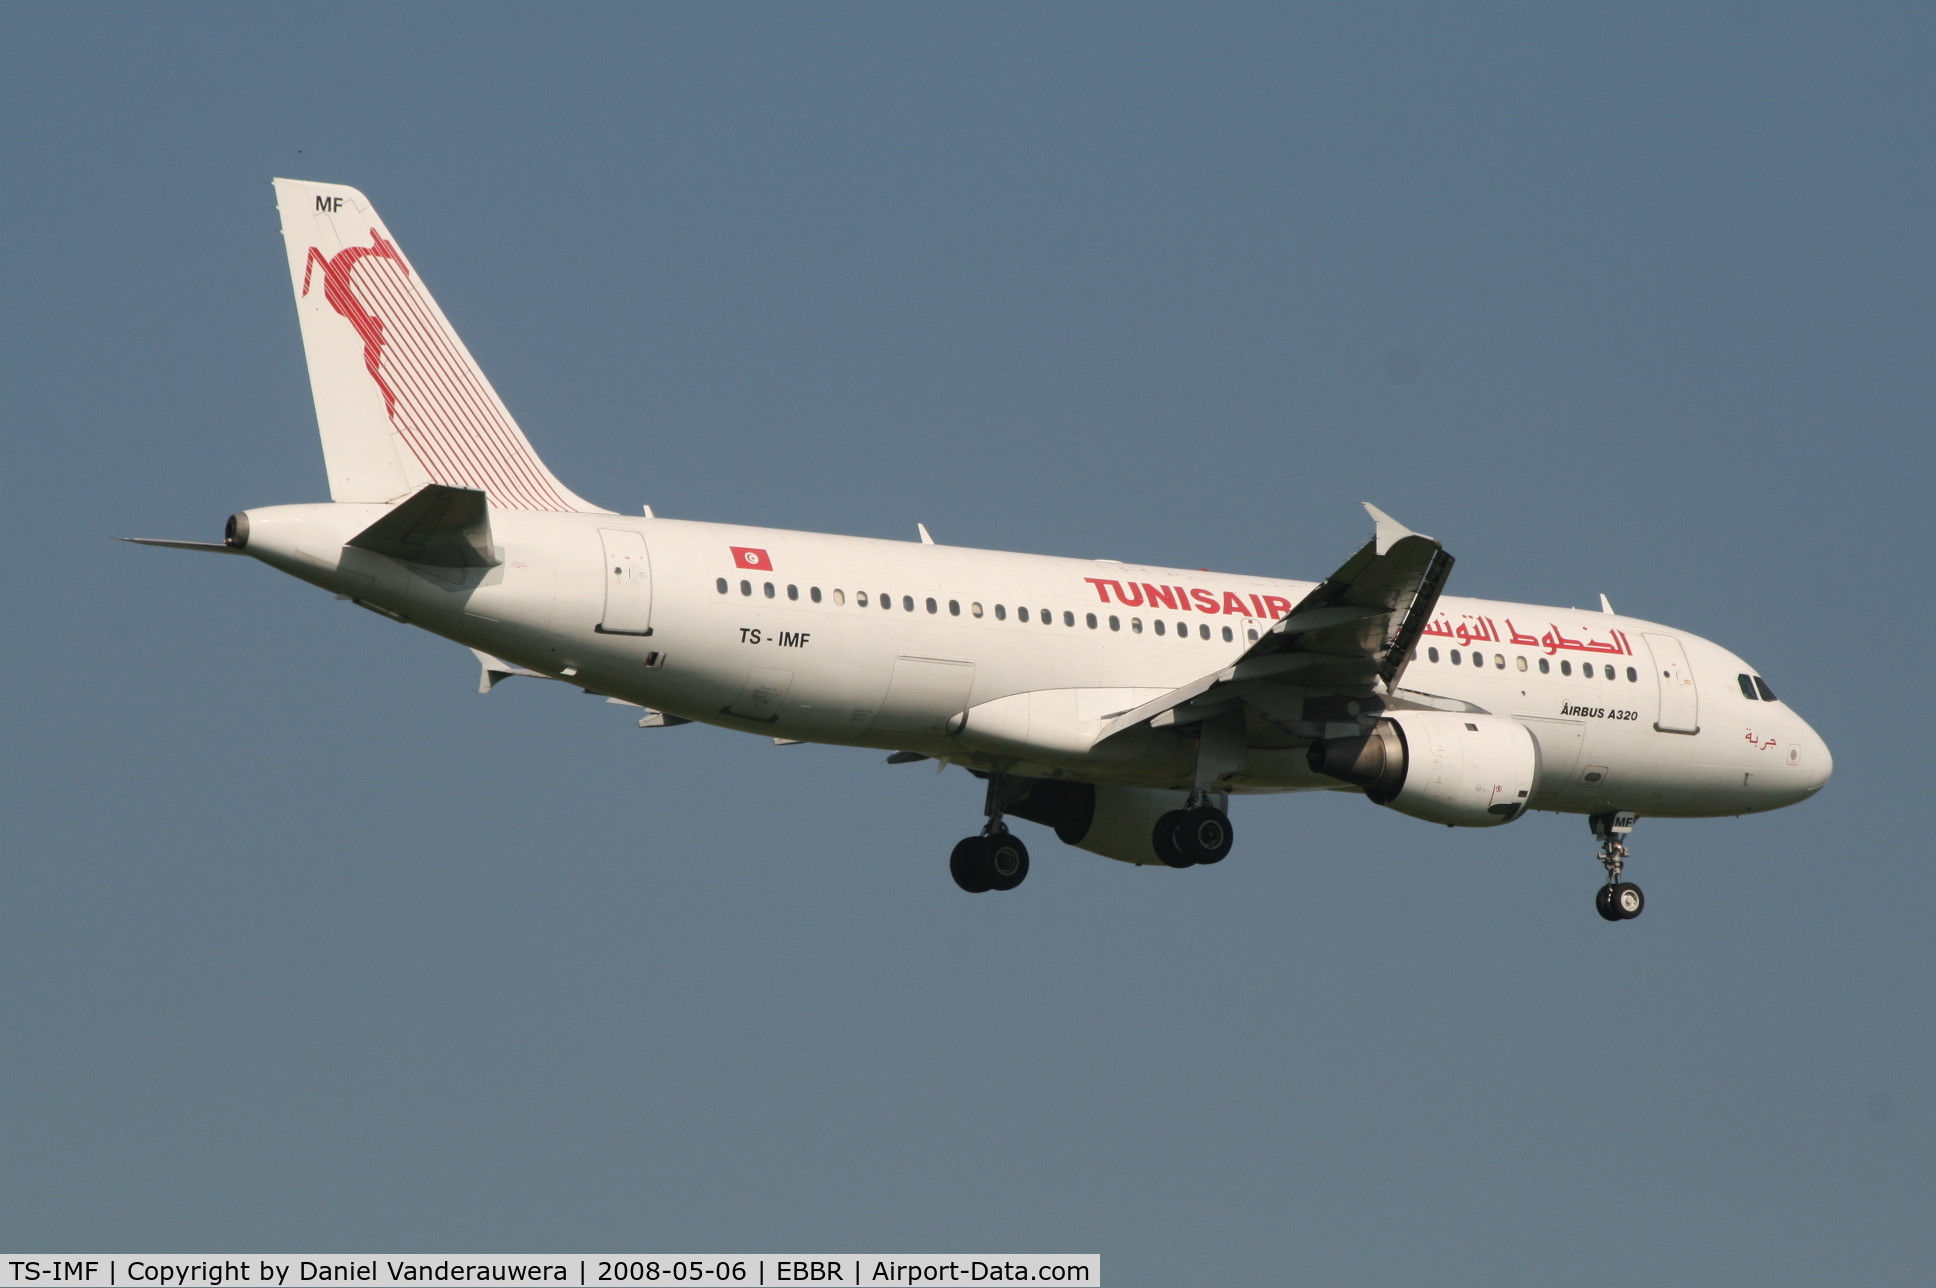 TS-IMF, 1992 Airbus A320-211 C/N 0370, descending to rwy 02